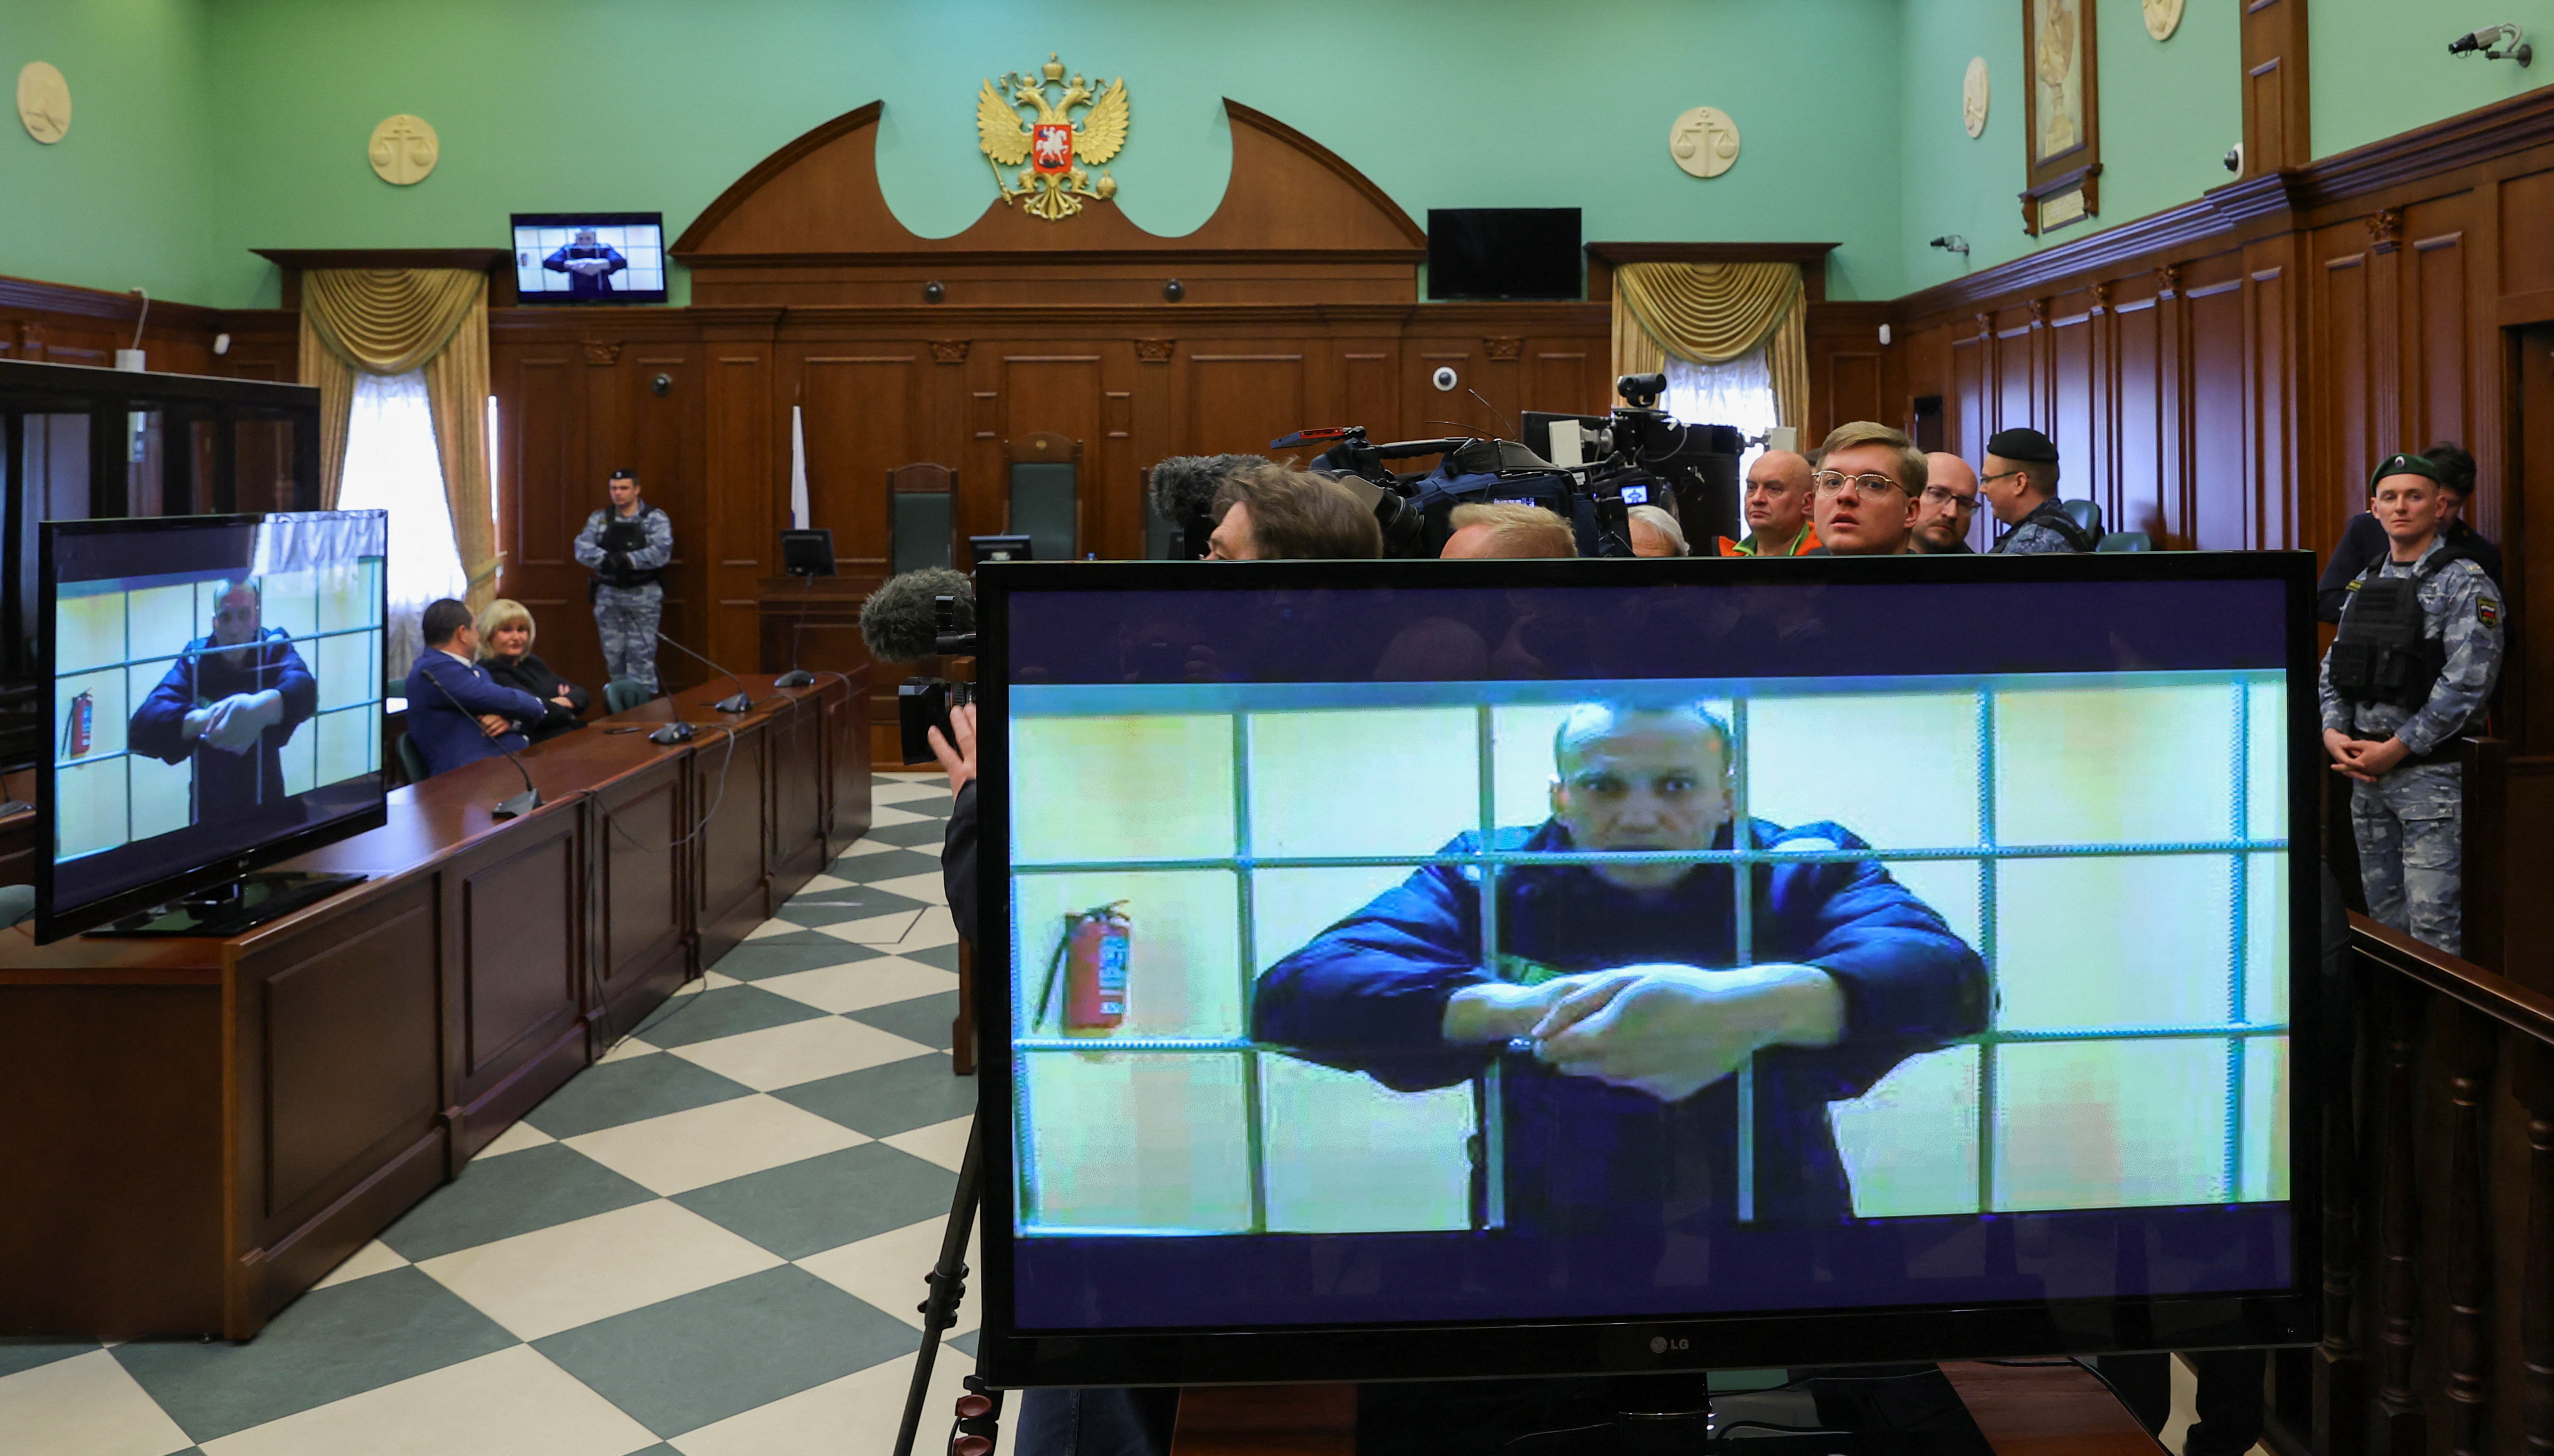 Jailed Russian opposition leader Alexei Navalny is seen on screens during a court hearing in Moscow